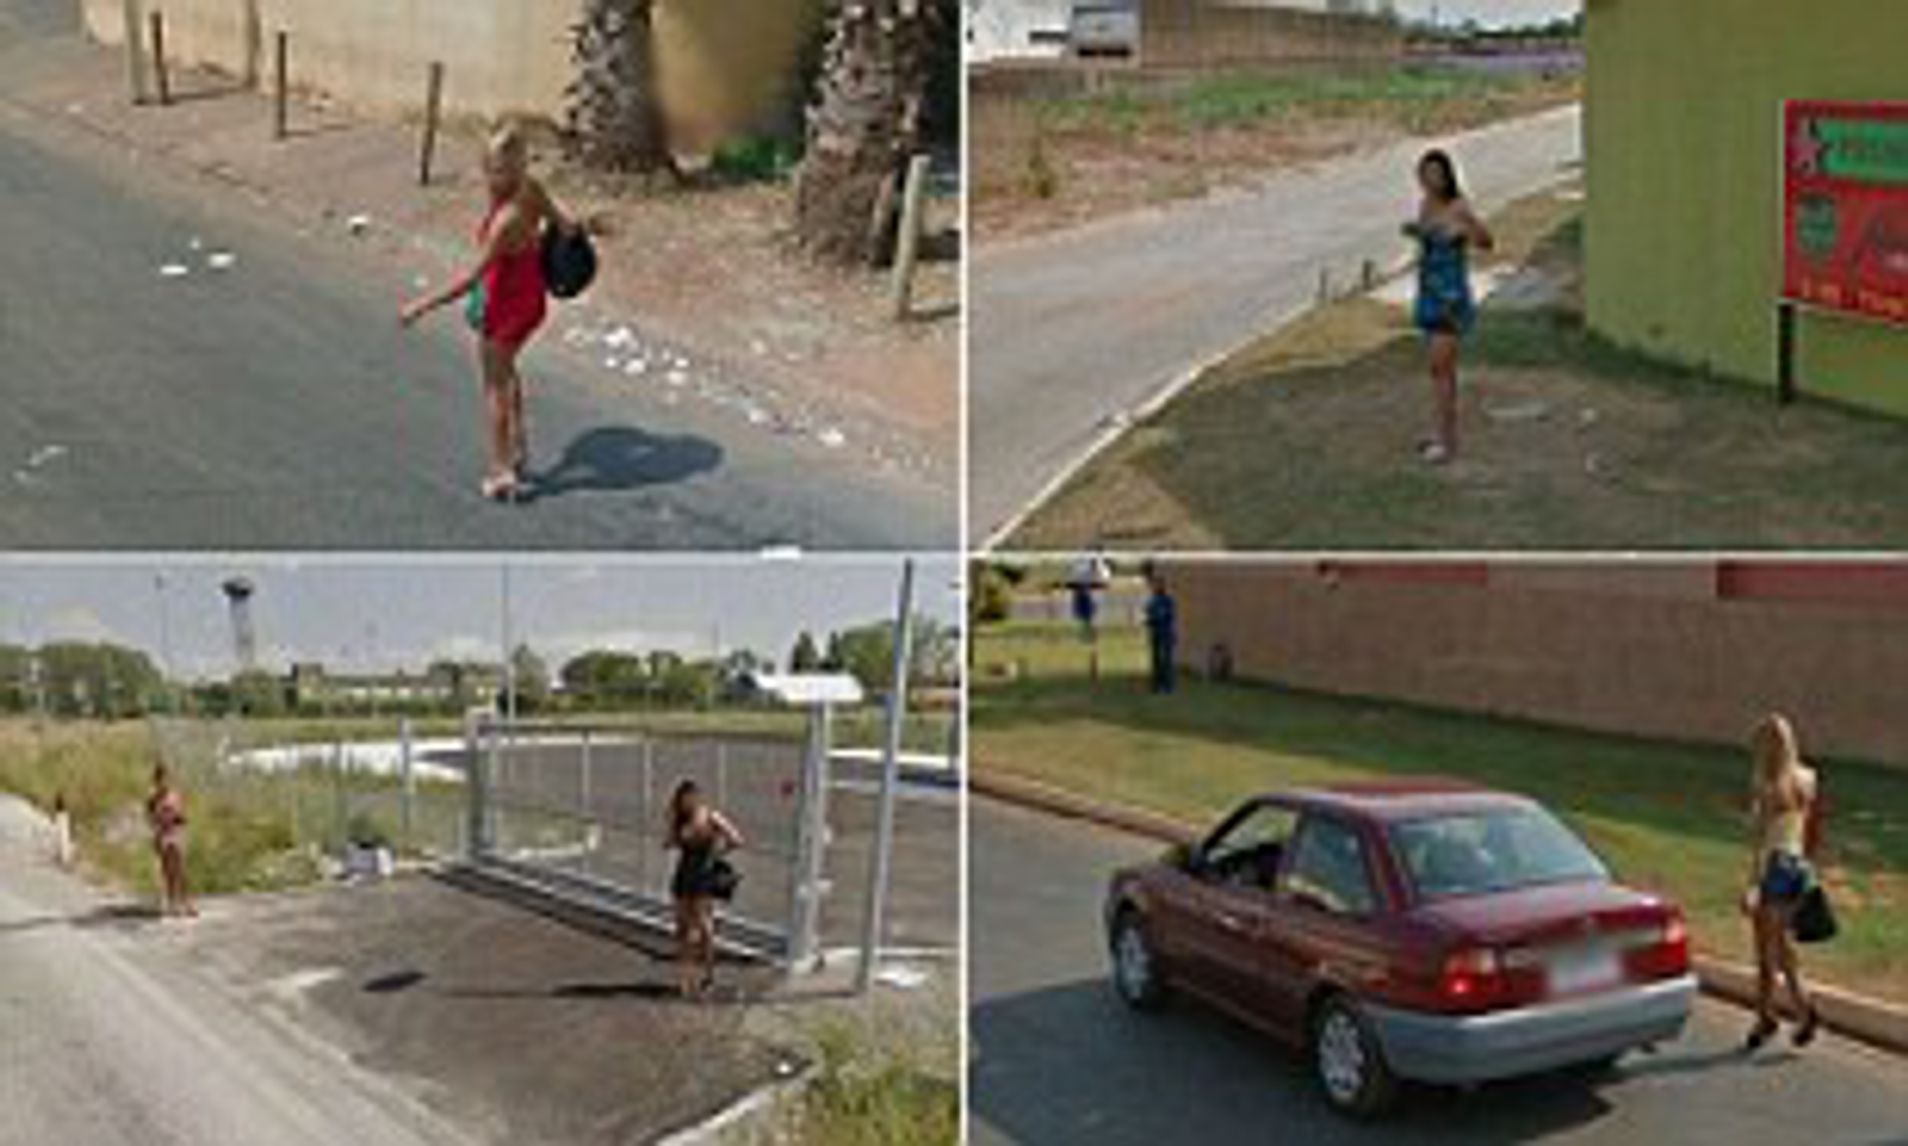 andrea ainslie share google street view hookers photos